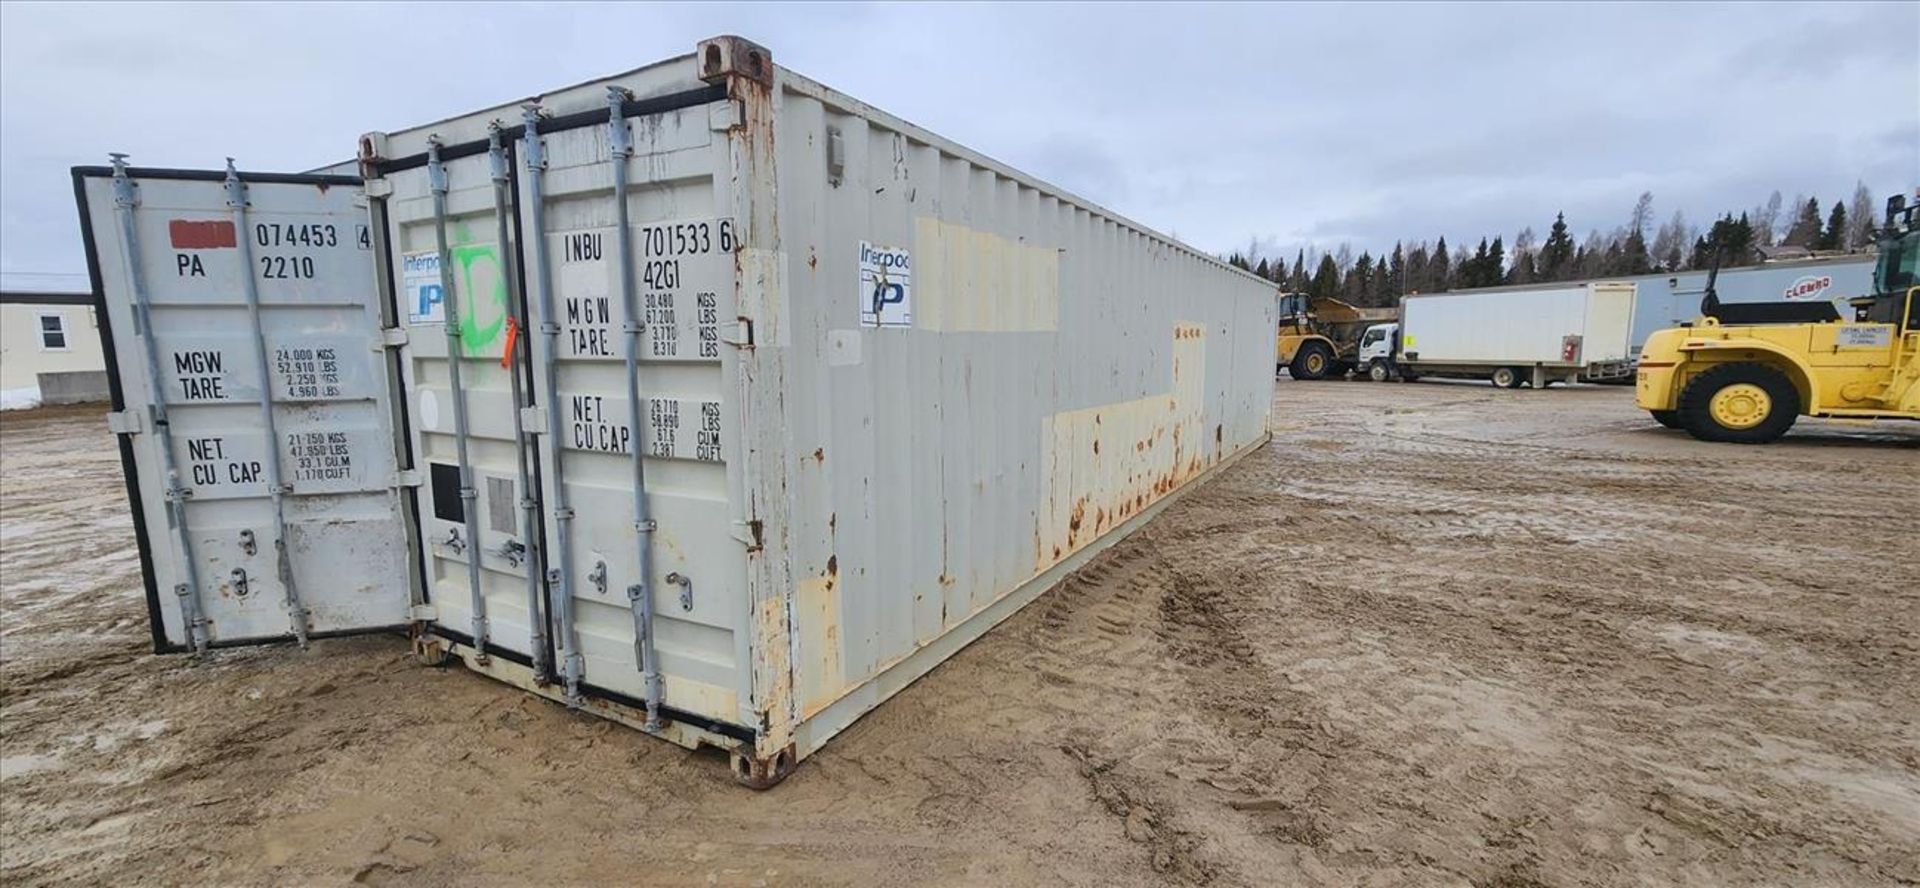 sea container, 40 ft. c/w contents: misc. new and used tires (Asset Location: Hallnor Yard) {Day - Image 3 of 3